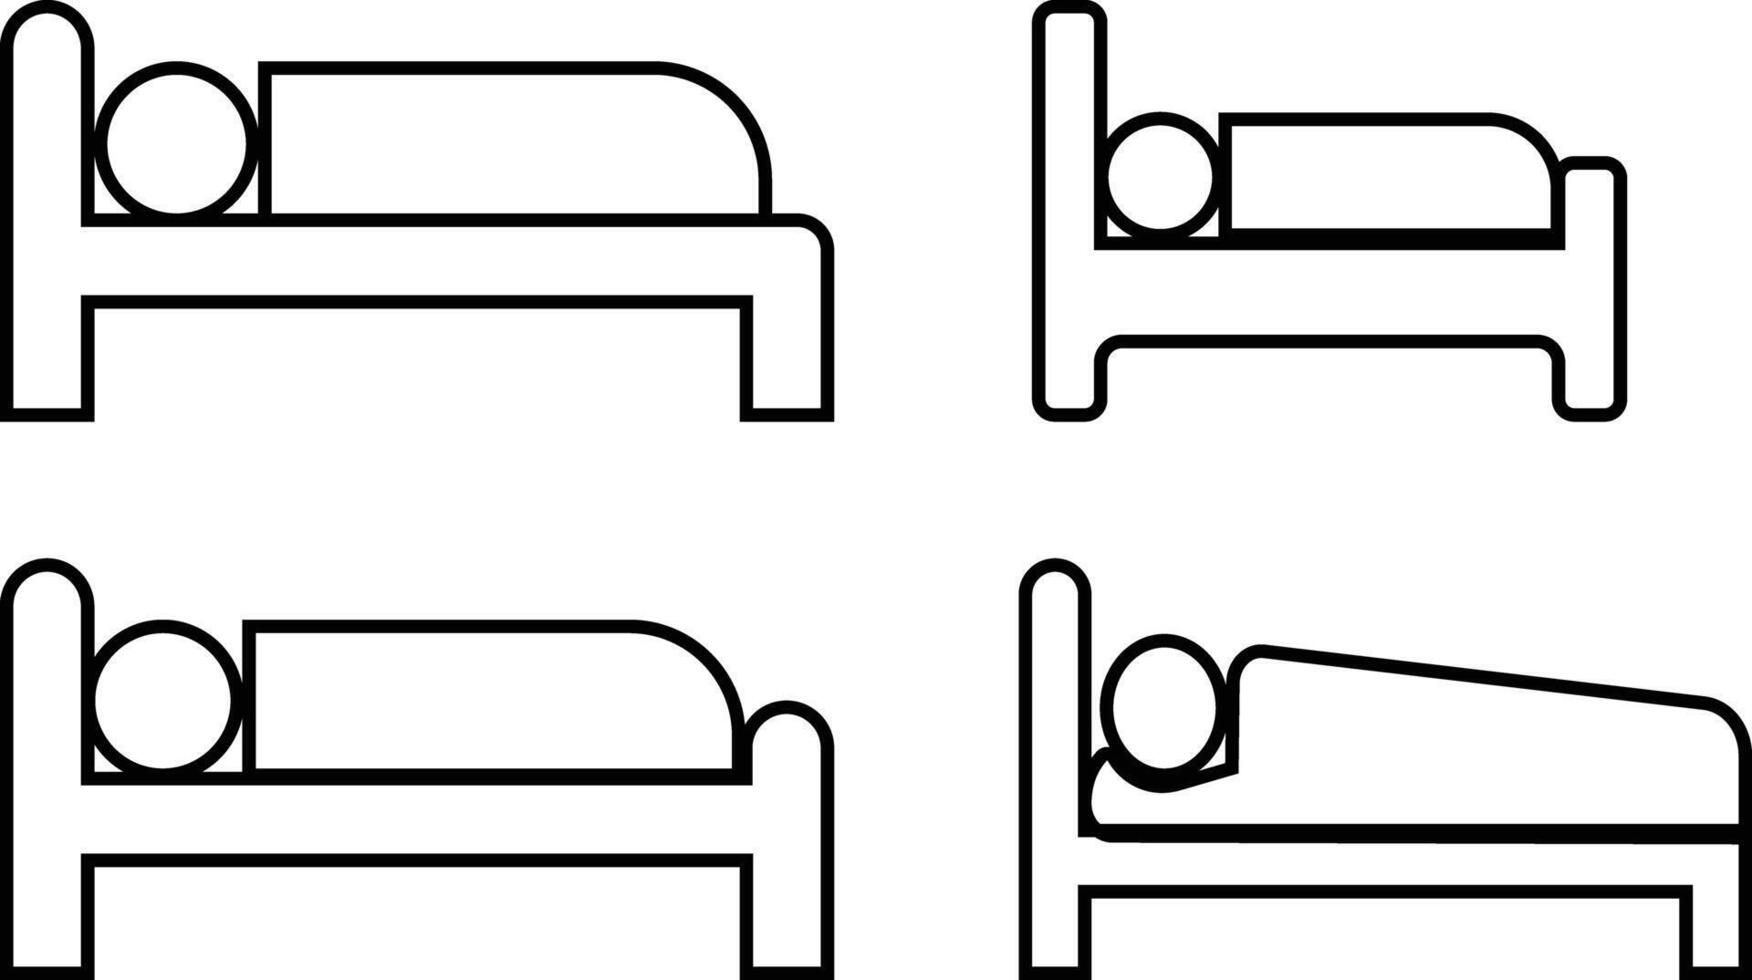 Sleeping man on bed icon in line set. isolated on Man lying in bed having a dream concept template. symbol accommodation for hotel, hostel, motel. vector for apps website